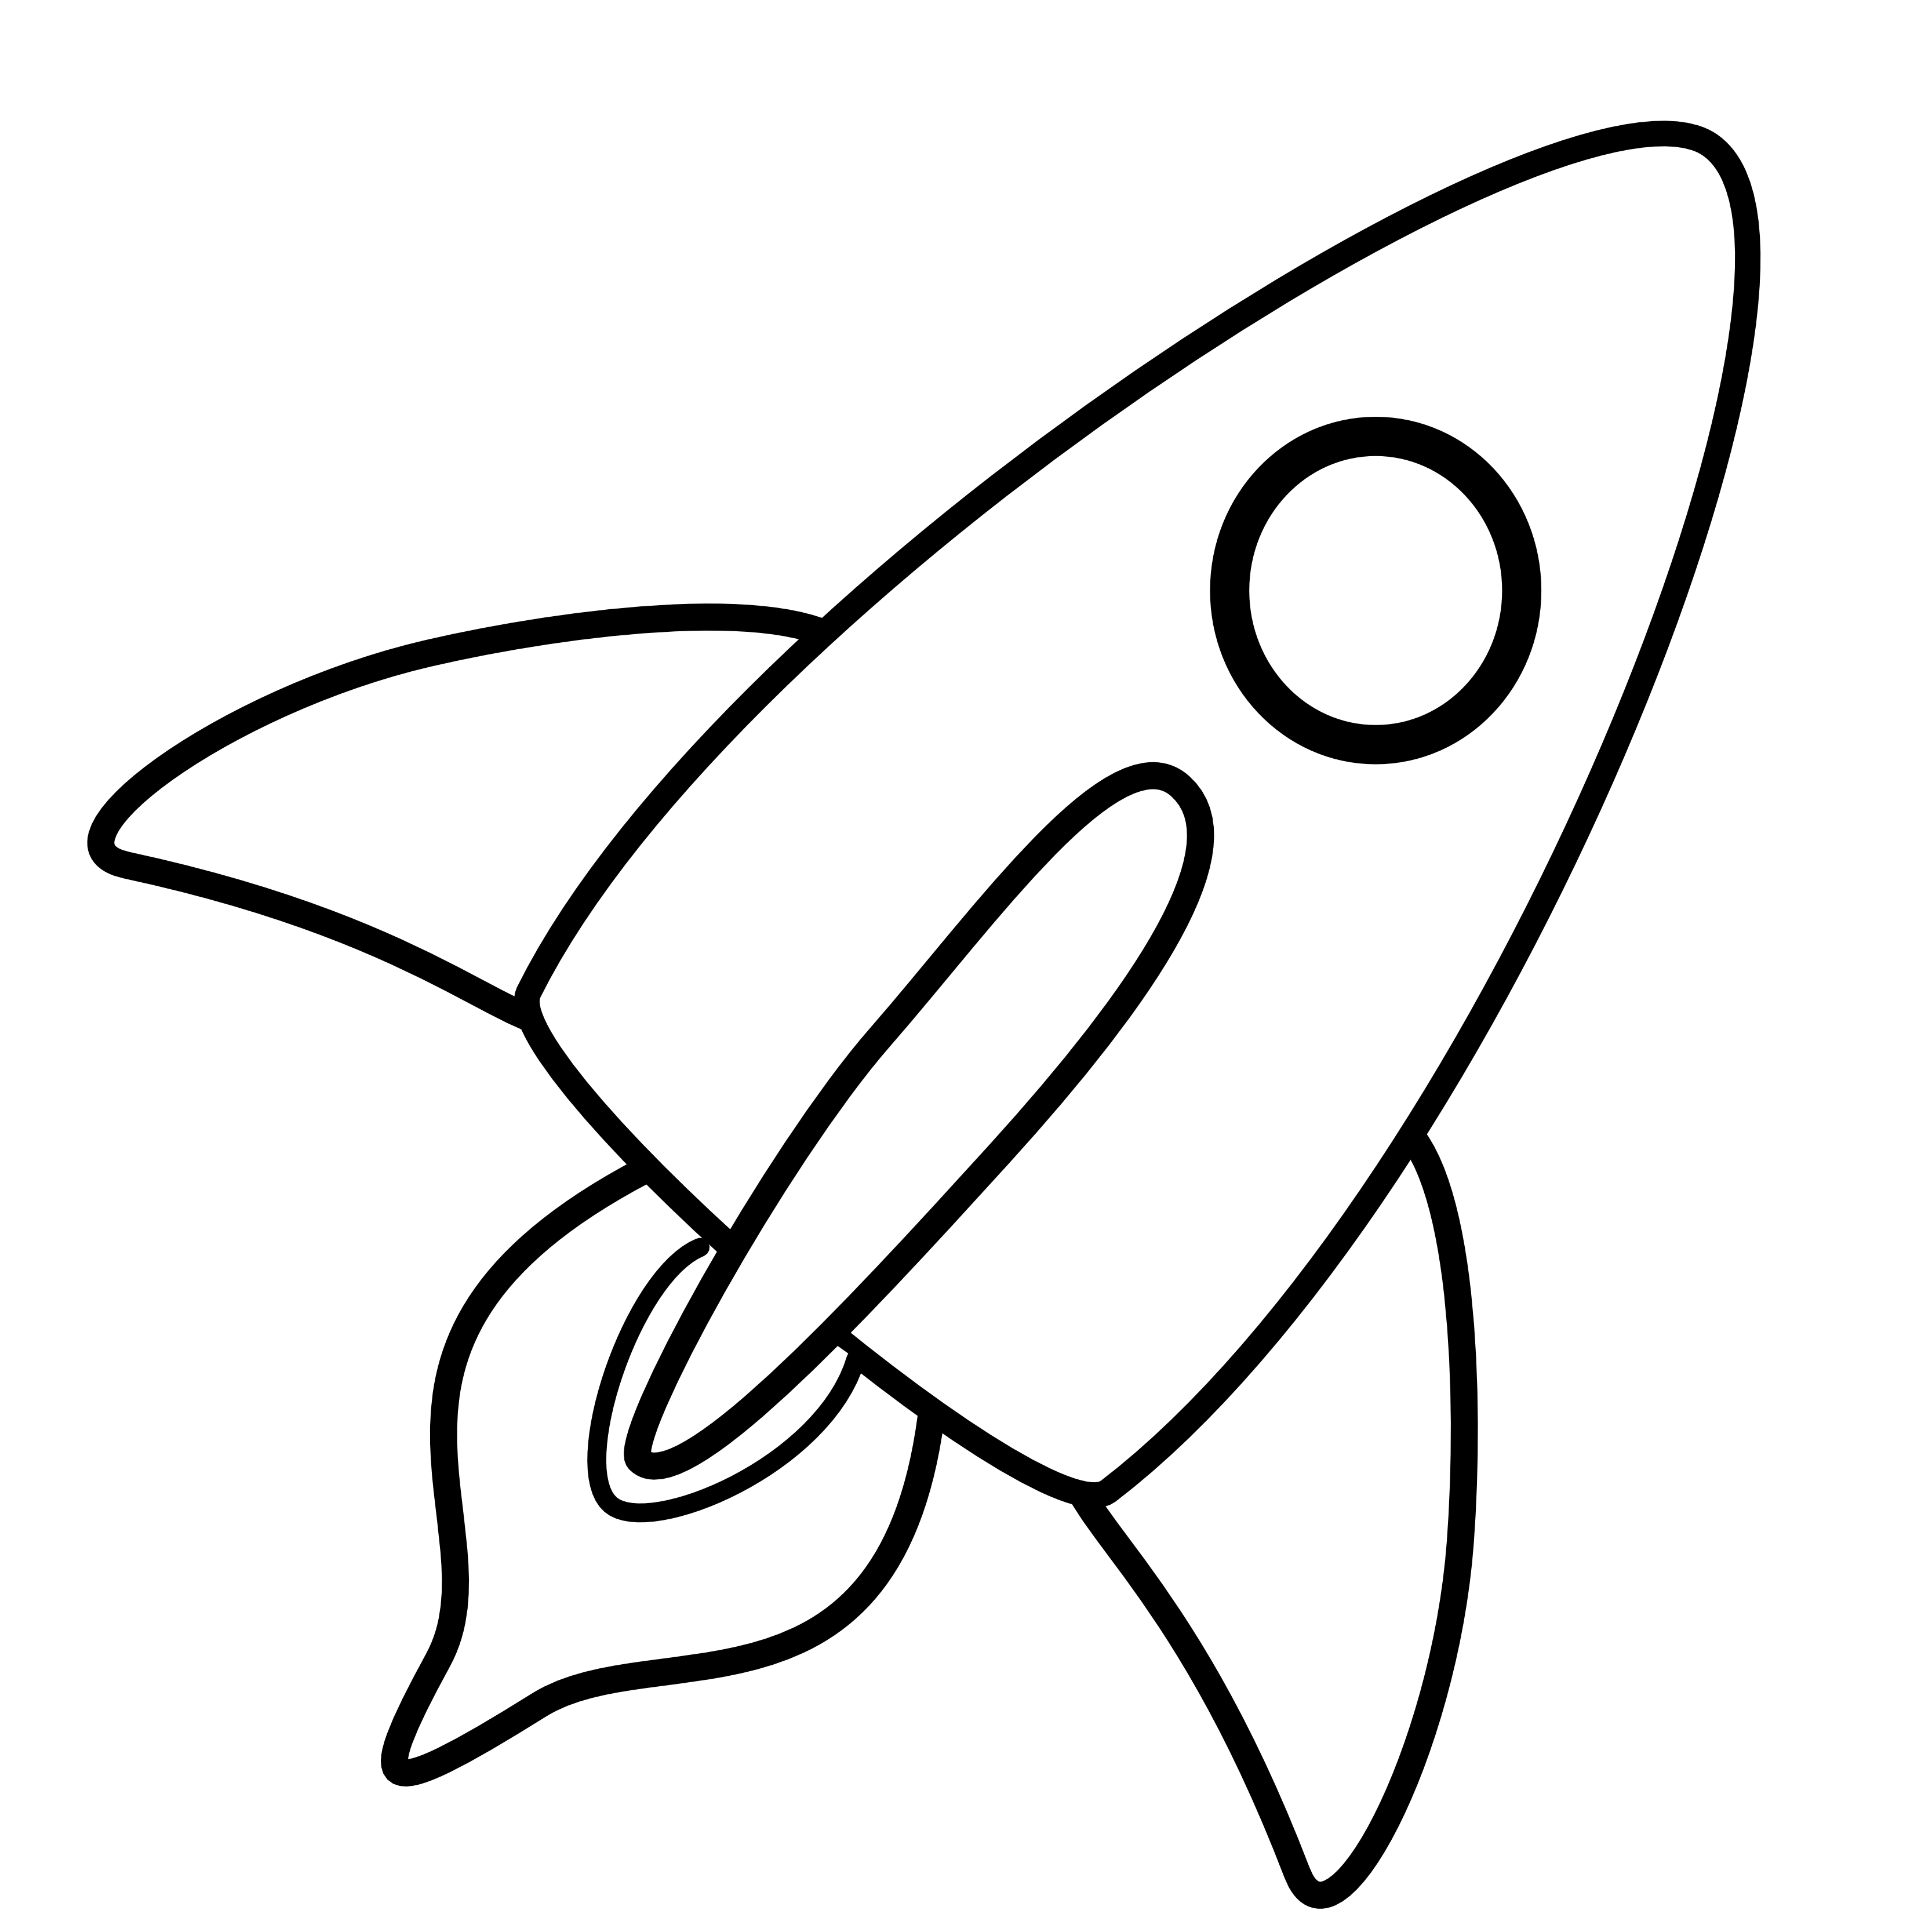 rocket ship clipart black and white - photo #9